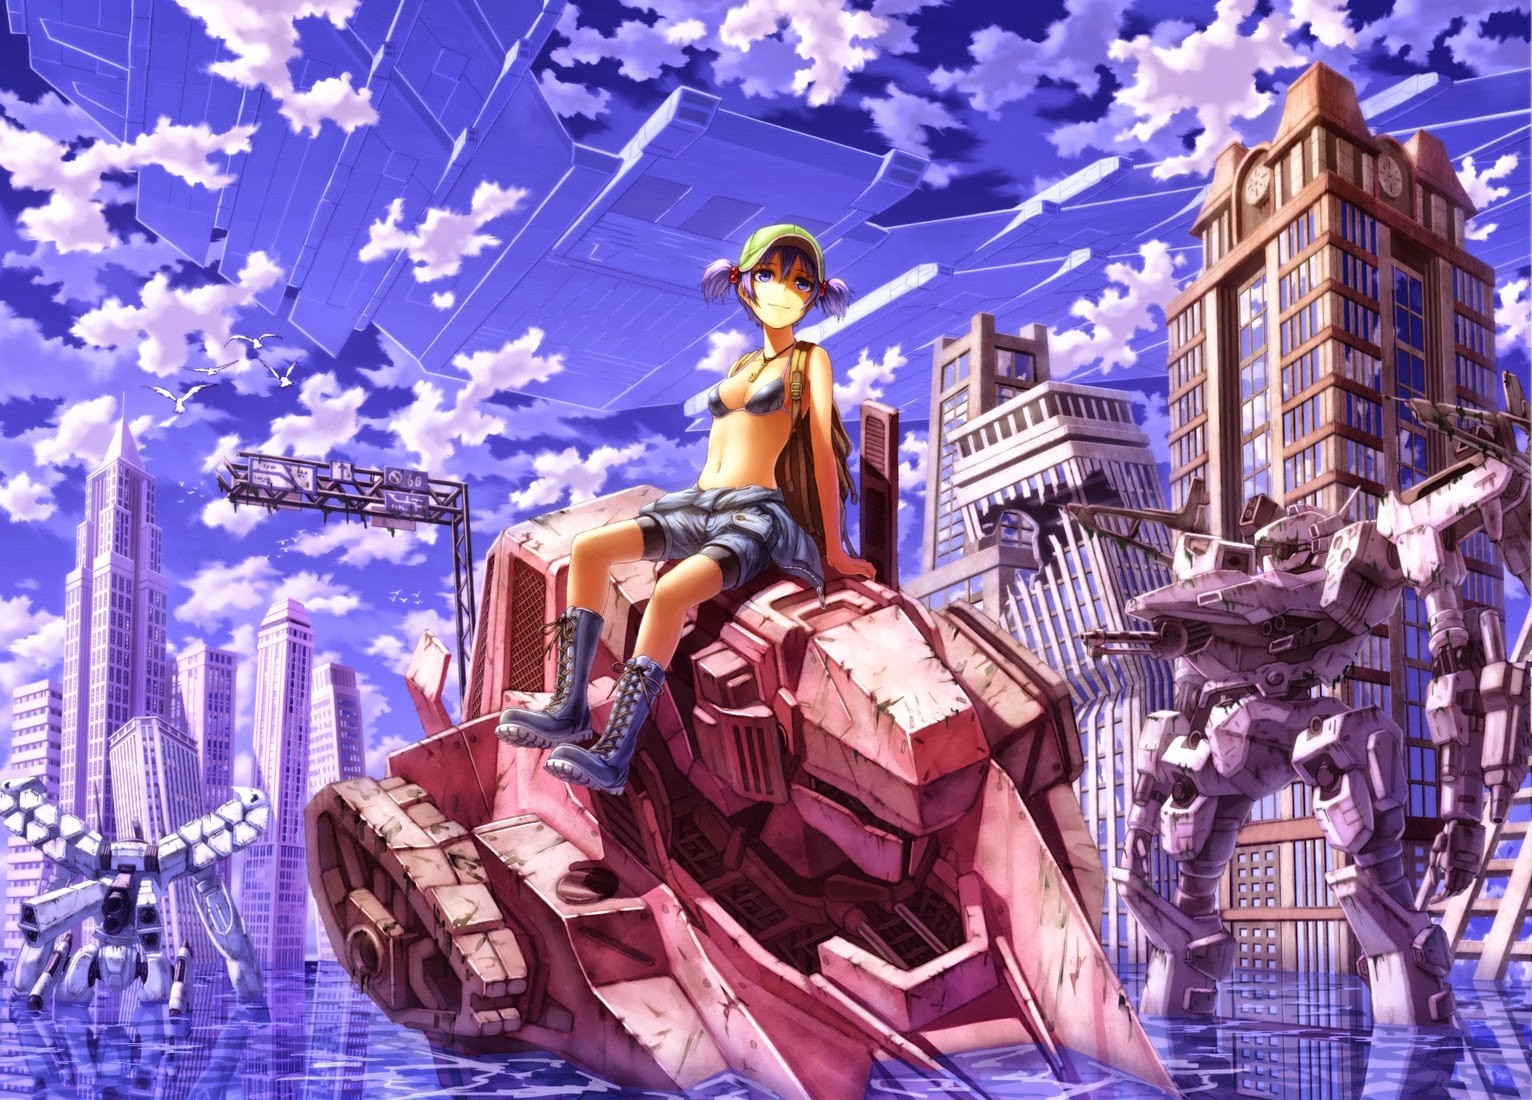 General 1532x1100 Kawashiro Nitori  mechs anime girls anime boobs science fiction science fiction women bra smiling looking at viewer hat sky clouds water